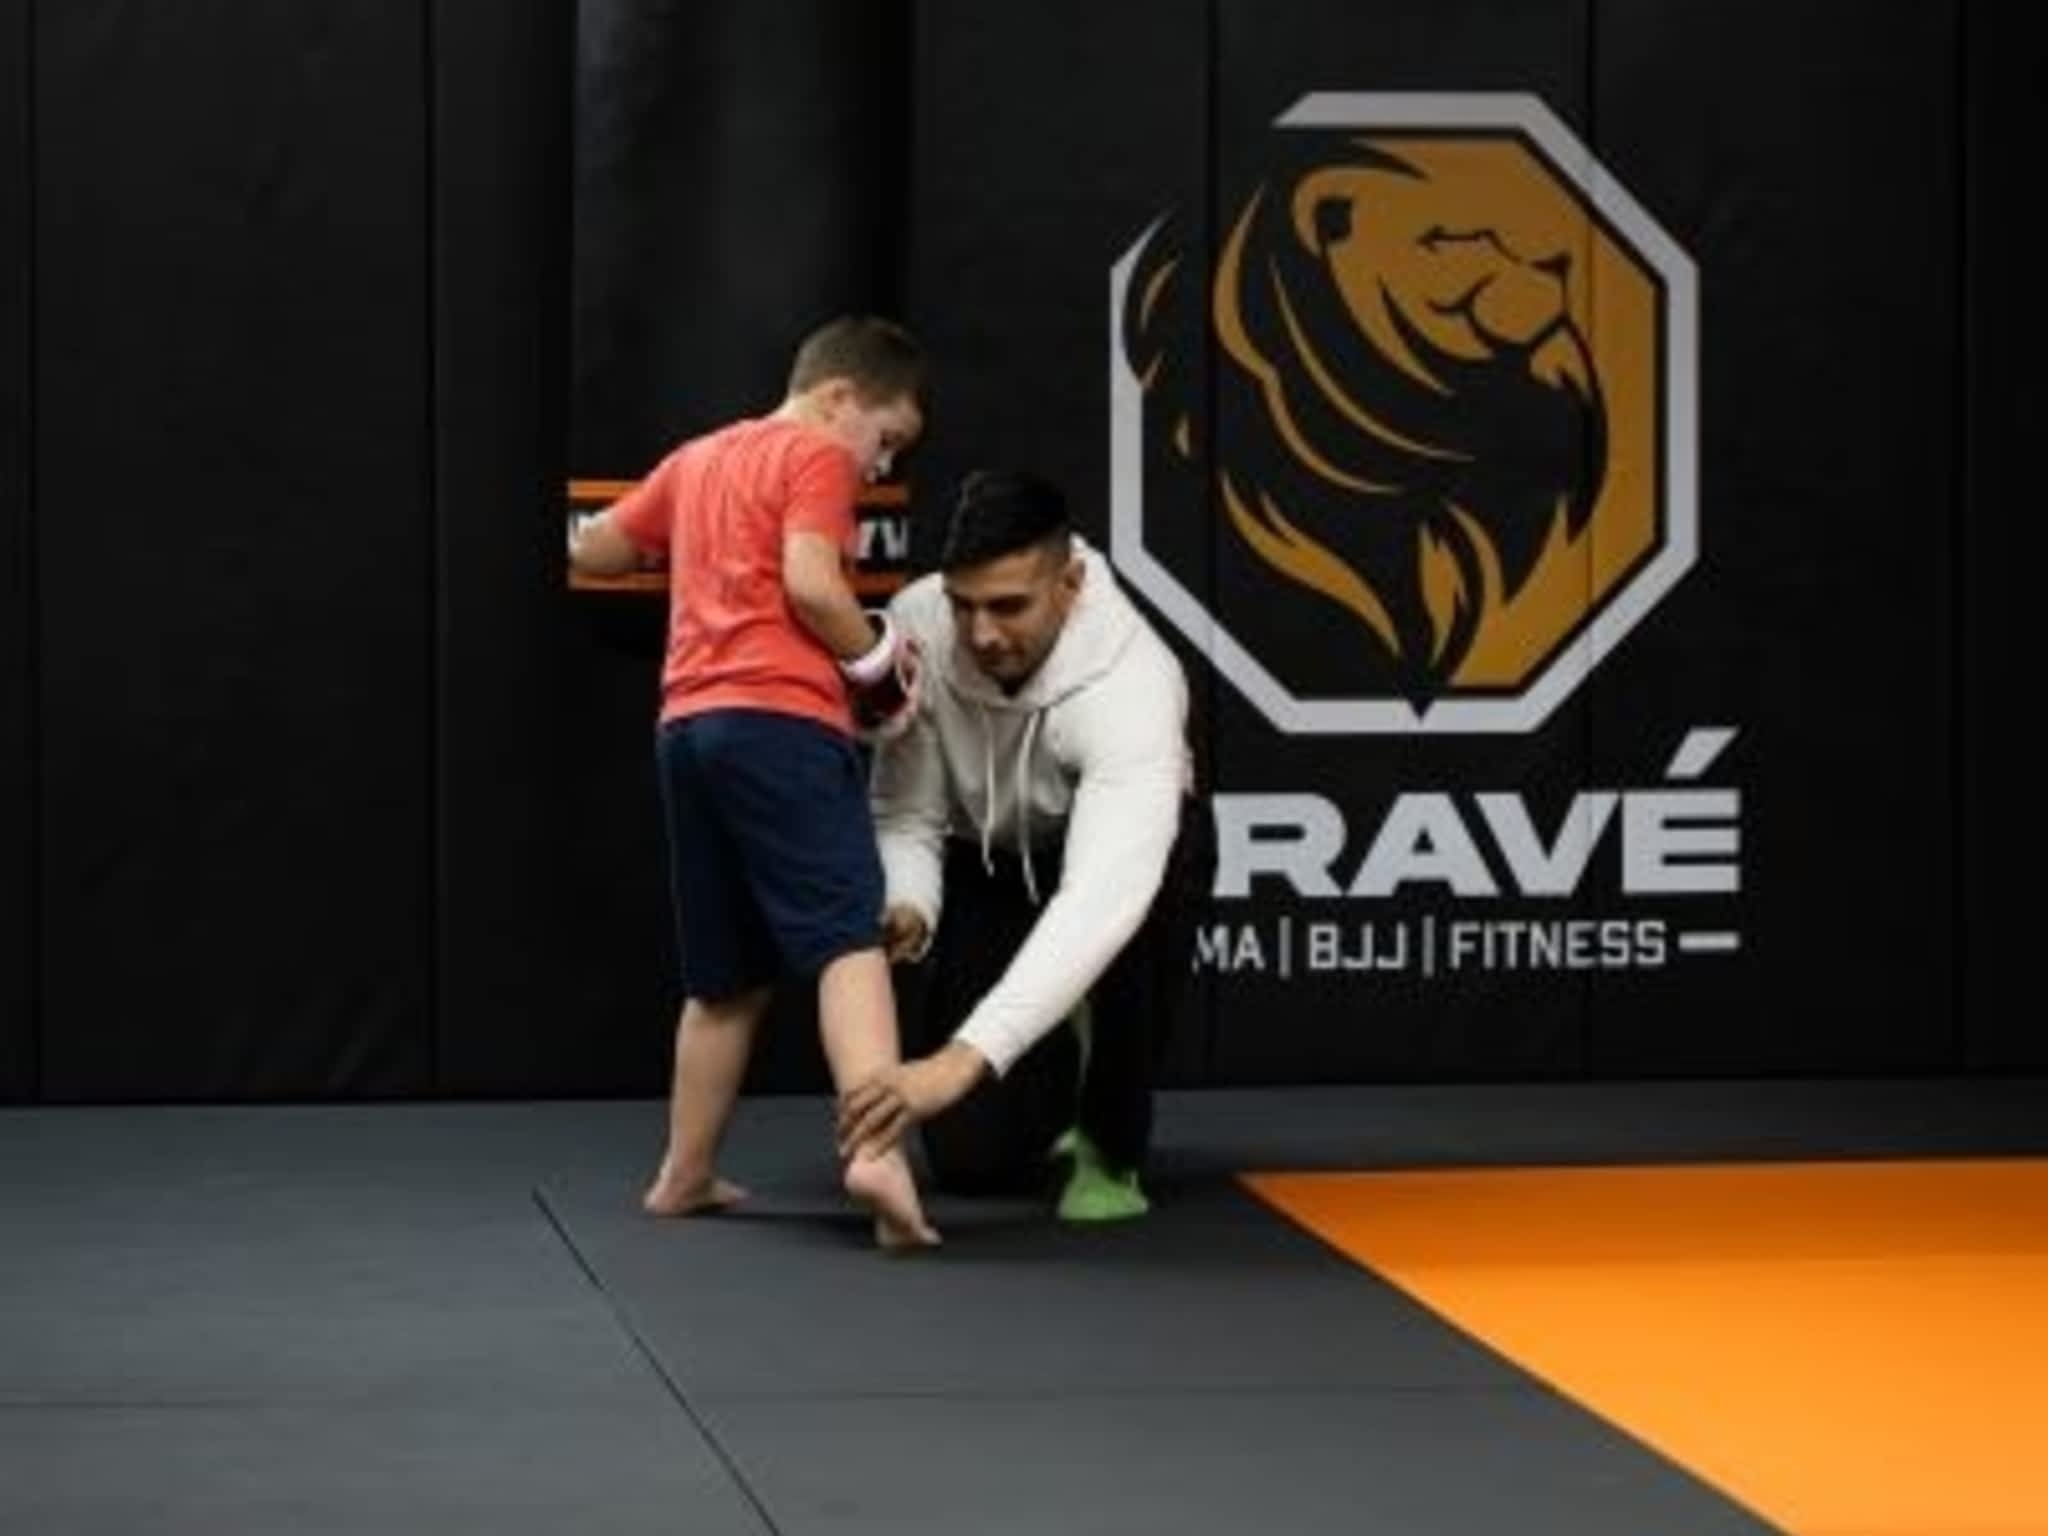 photo Brave MMA and Fitness